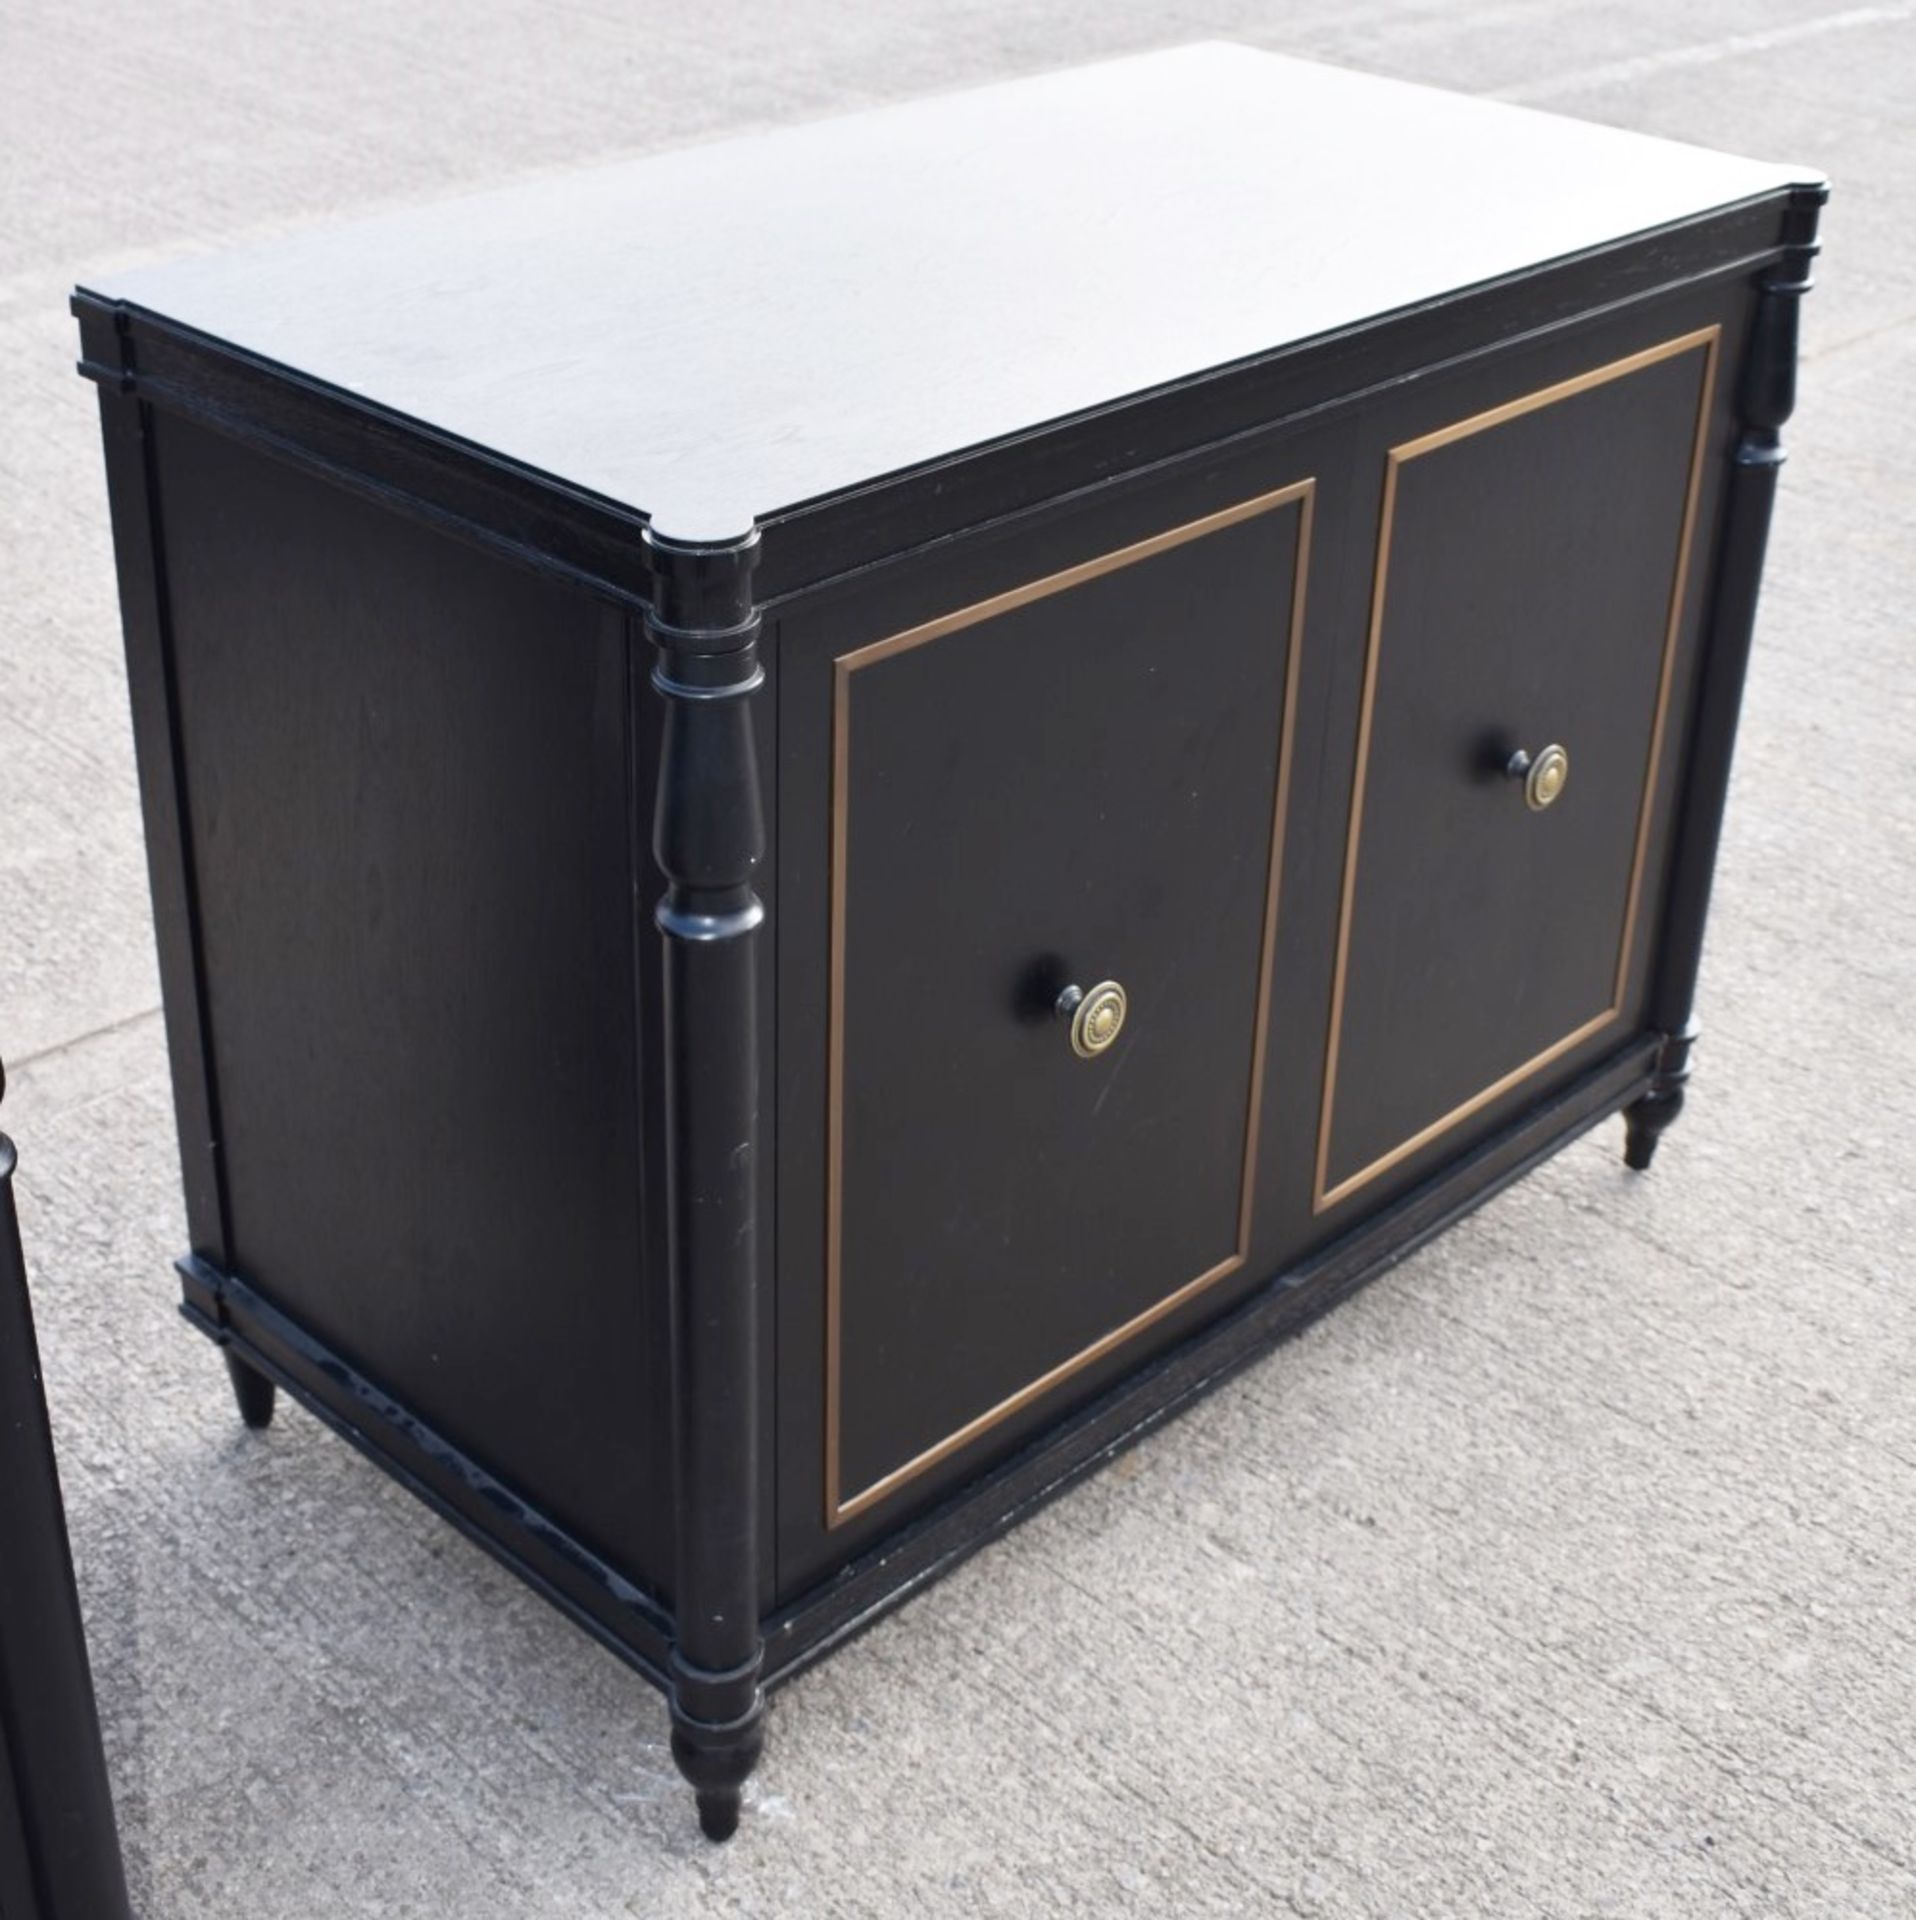 1 x Opulent 2-Door French Period-Style Handcrafted Solid Wood Cabinet in Black, with Brass Inlaid - Image 11 of 12